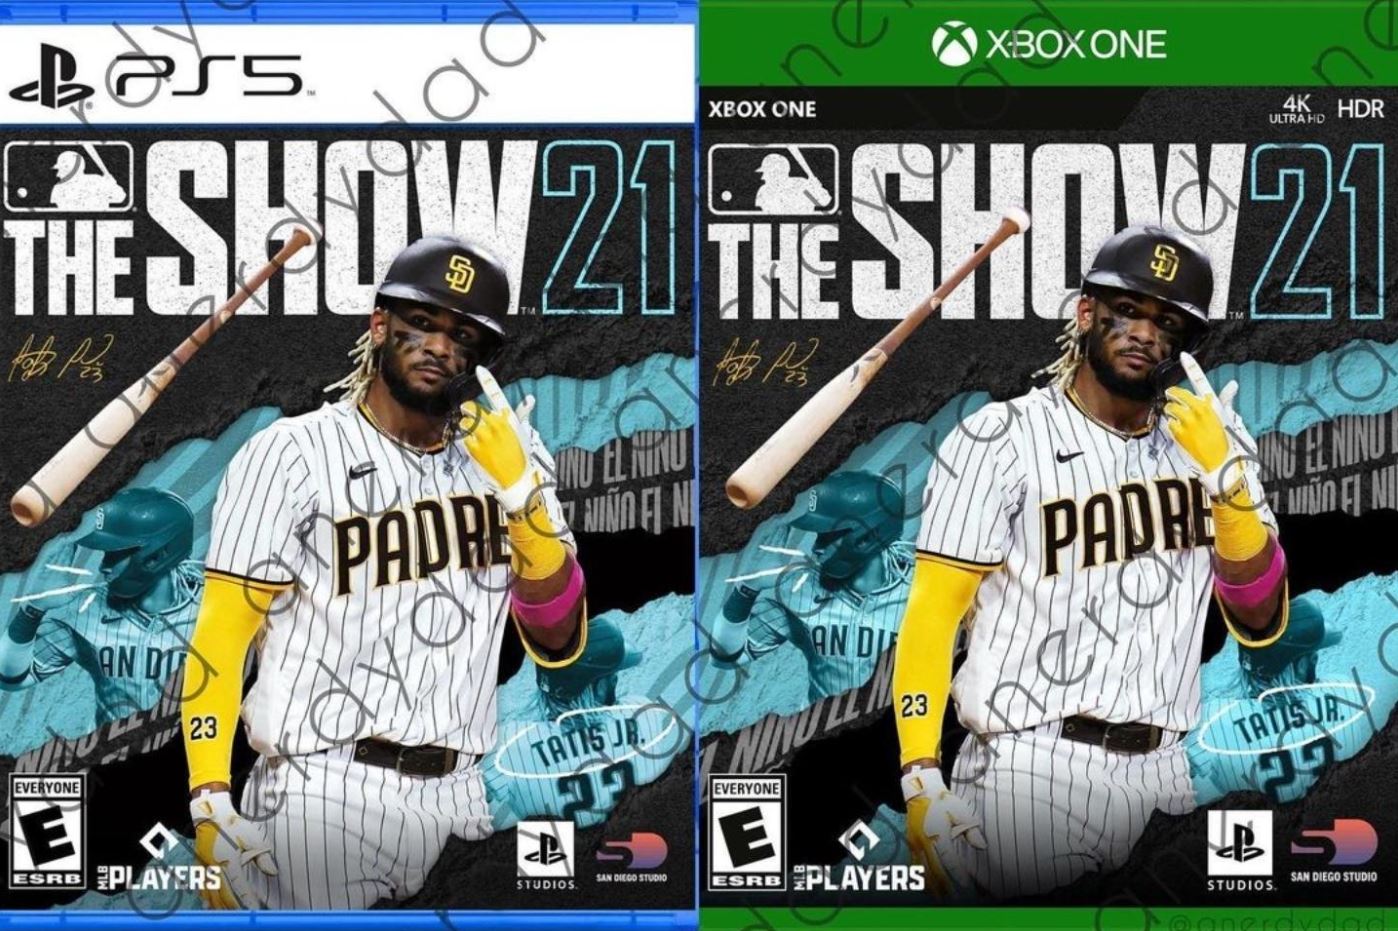 mlb-the-show-21-ps5-et-xbox-box-art-leaked-confirming-game-will-go-multiplatform-this-year-1